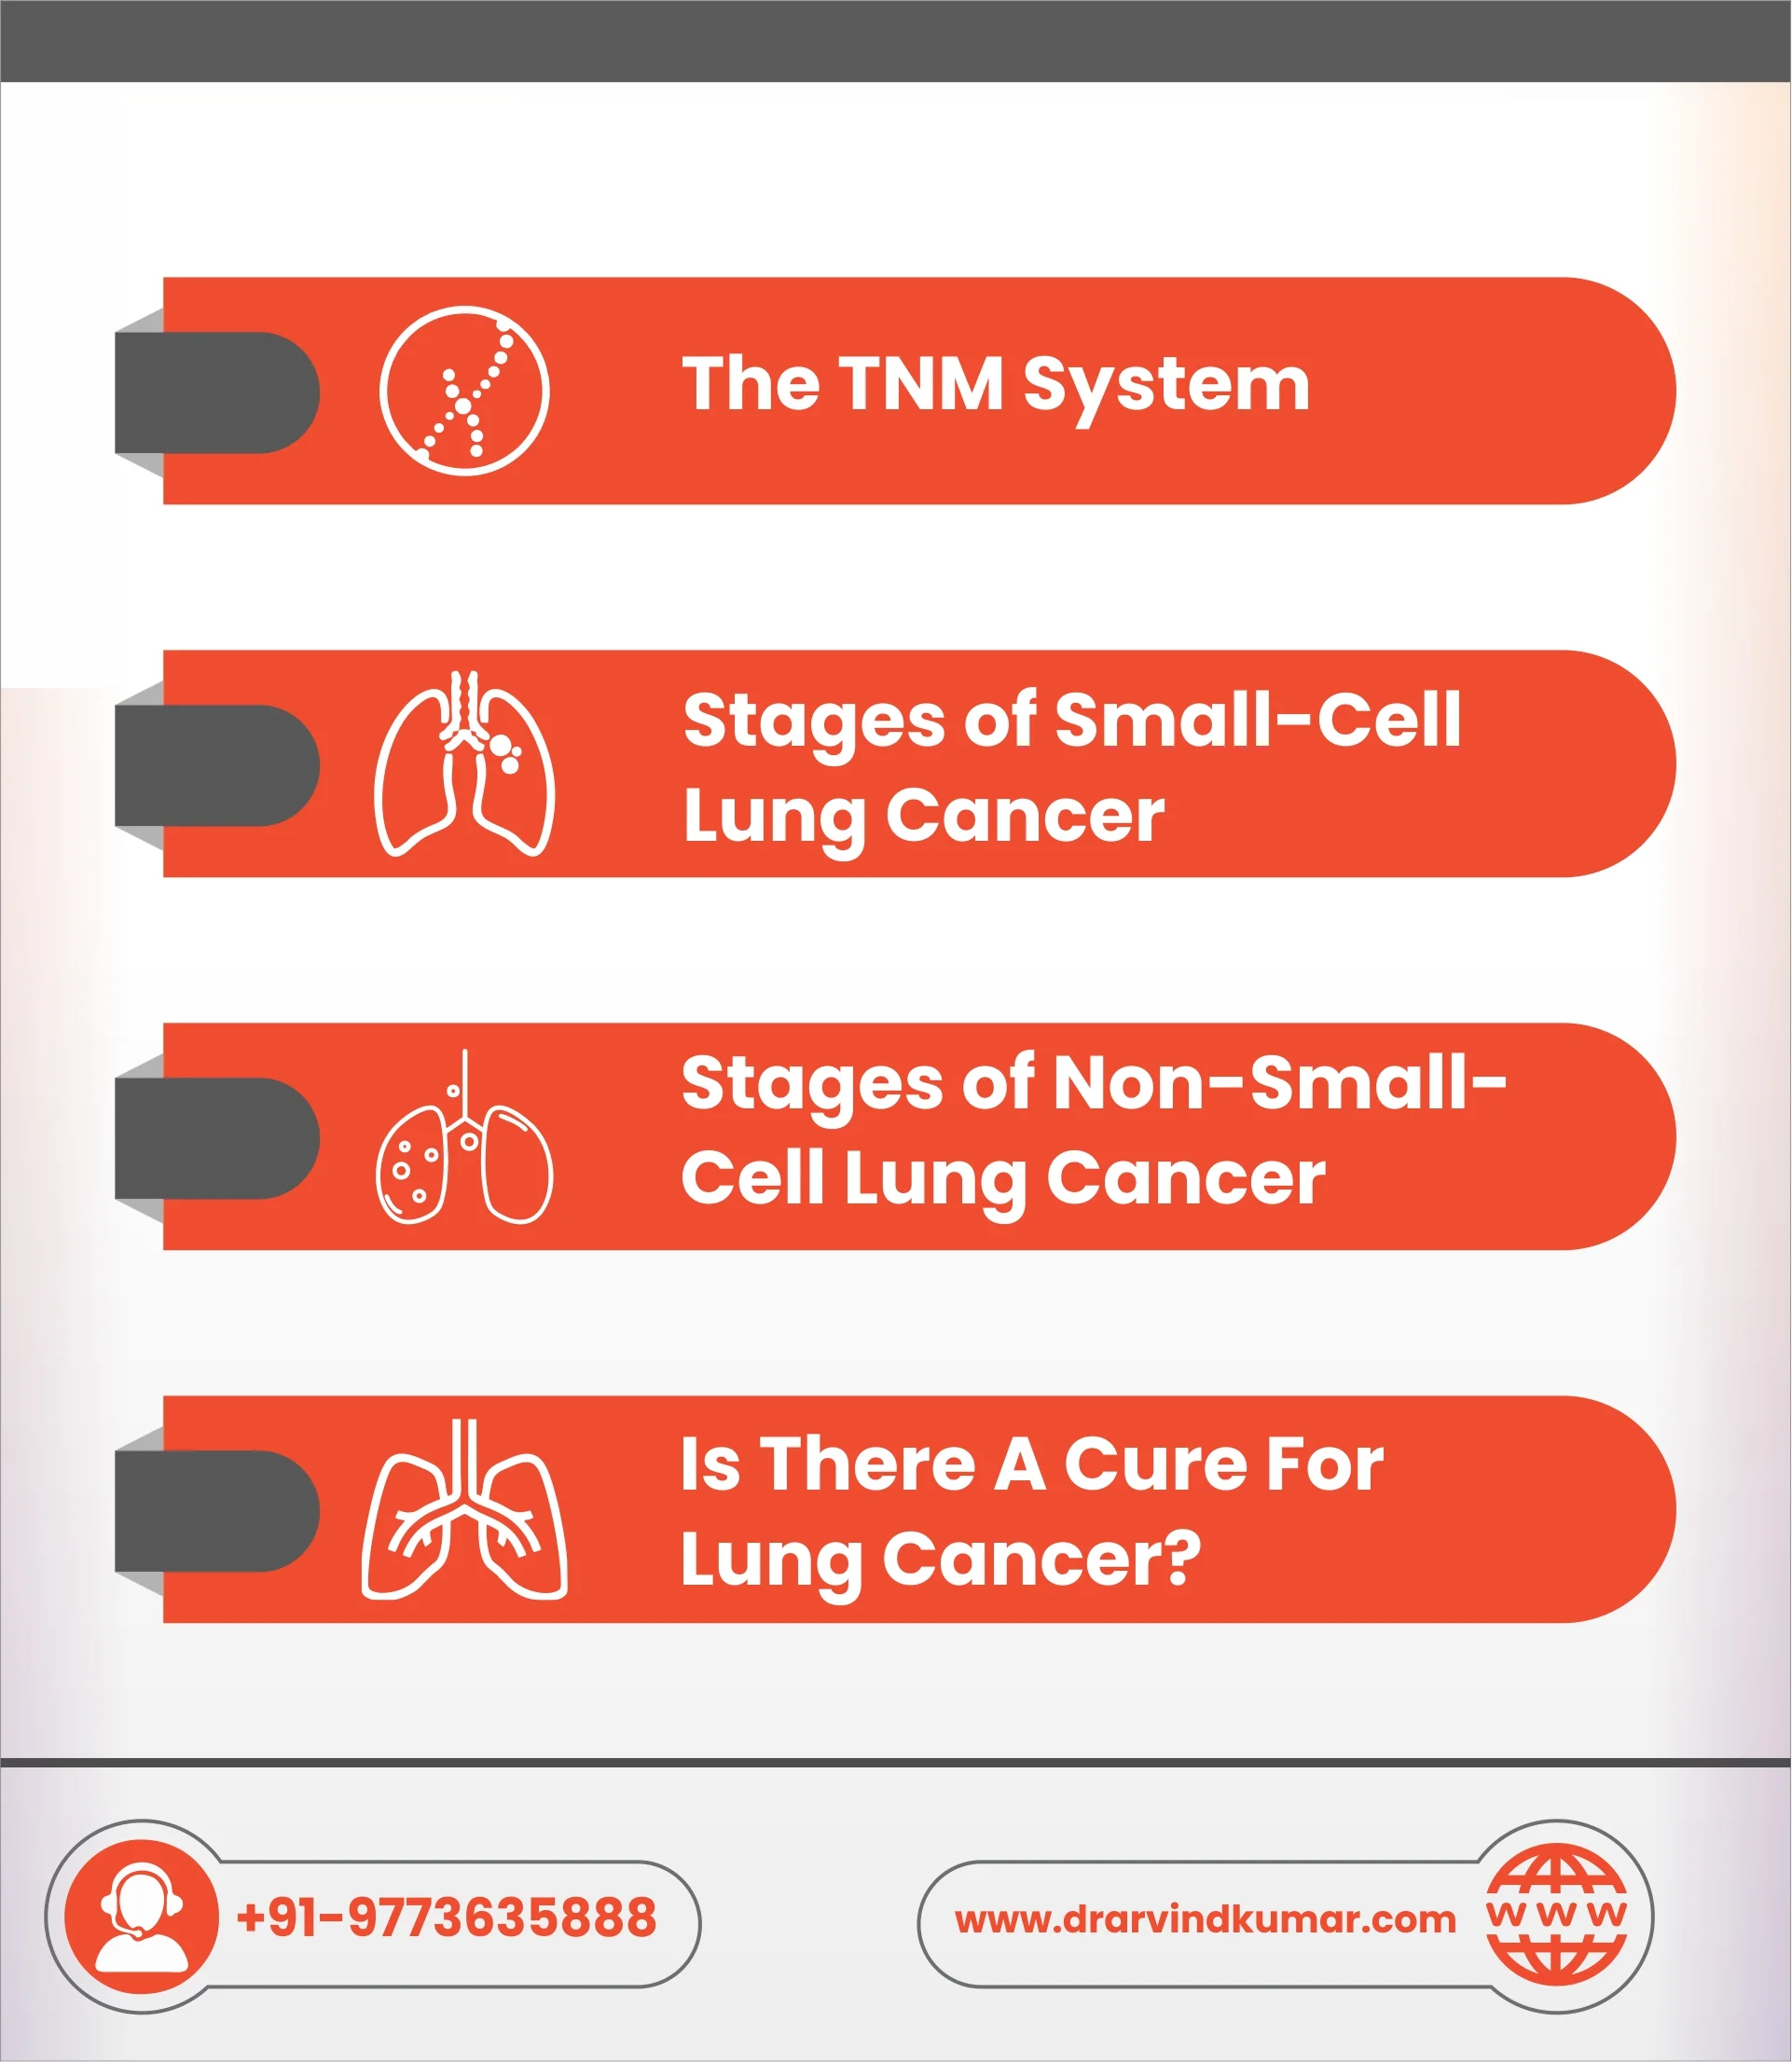 What stage of lung cancer is curable?